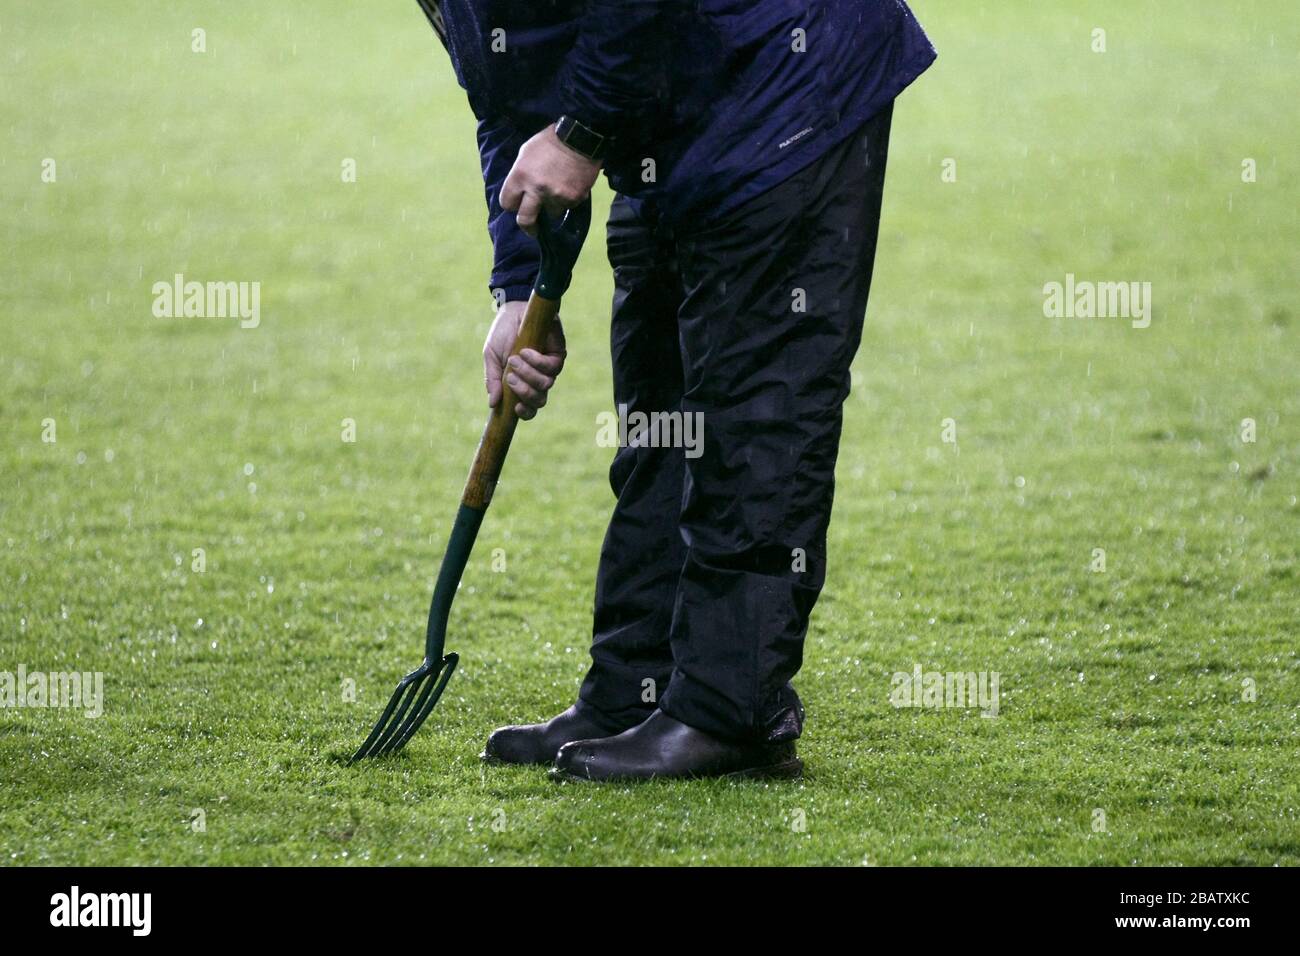 A Blackpool groundsman tends to the pitch before the game Stock Photo